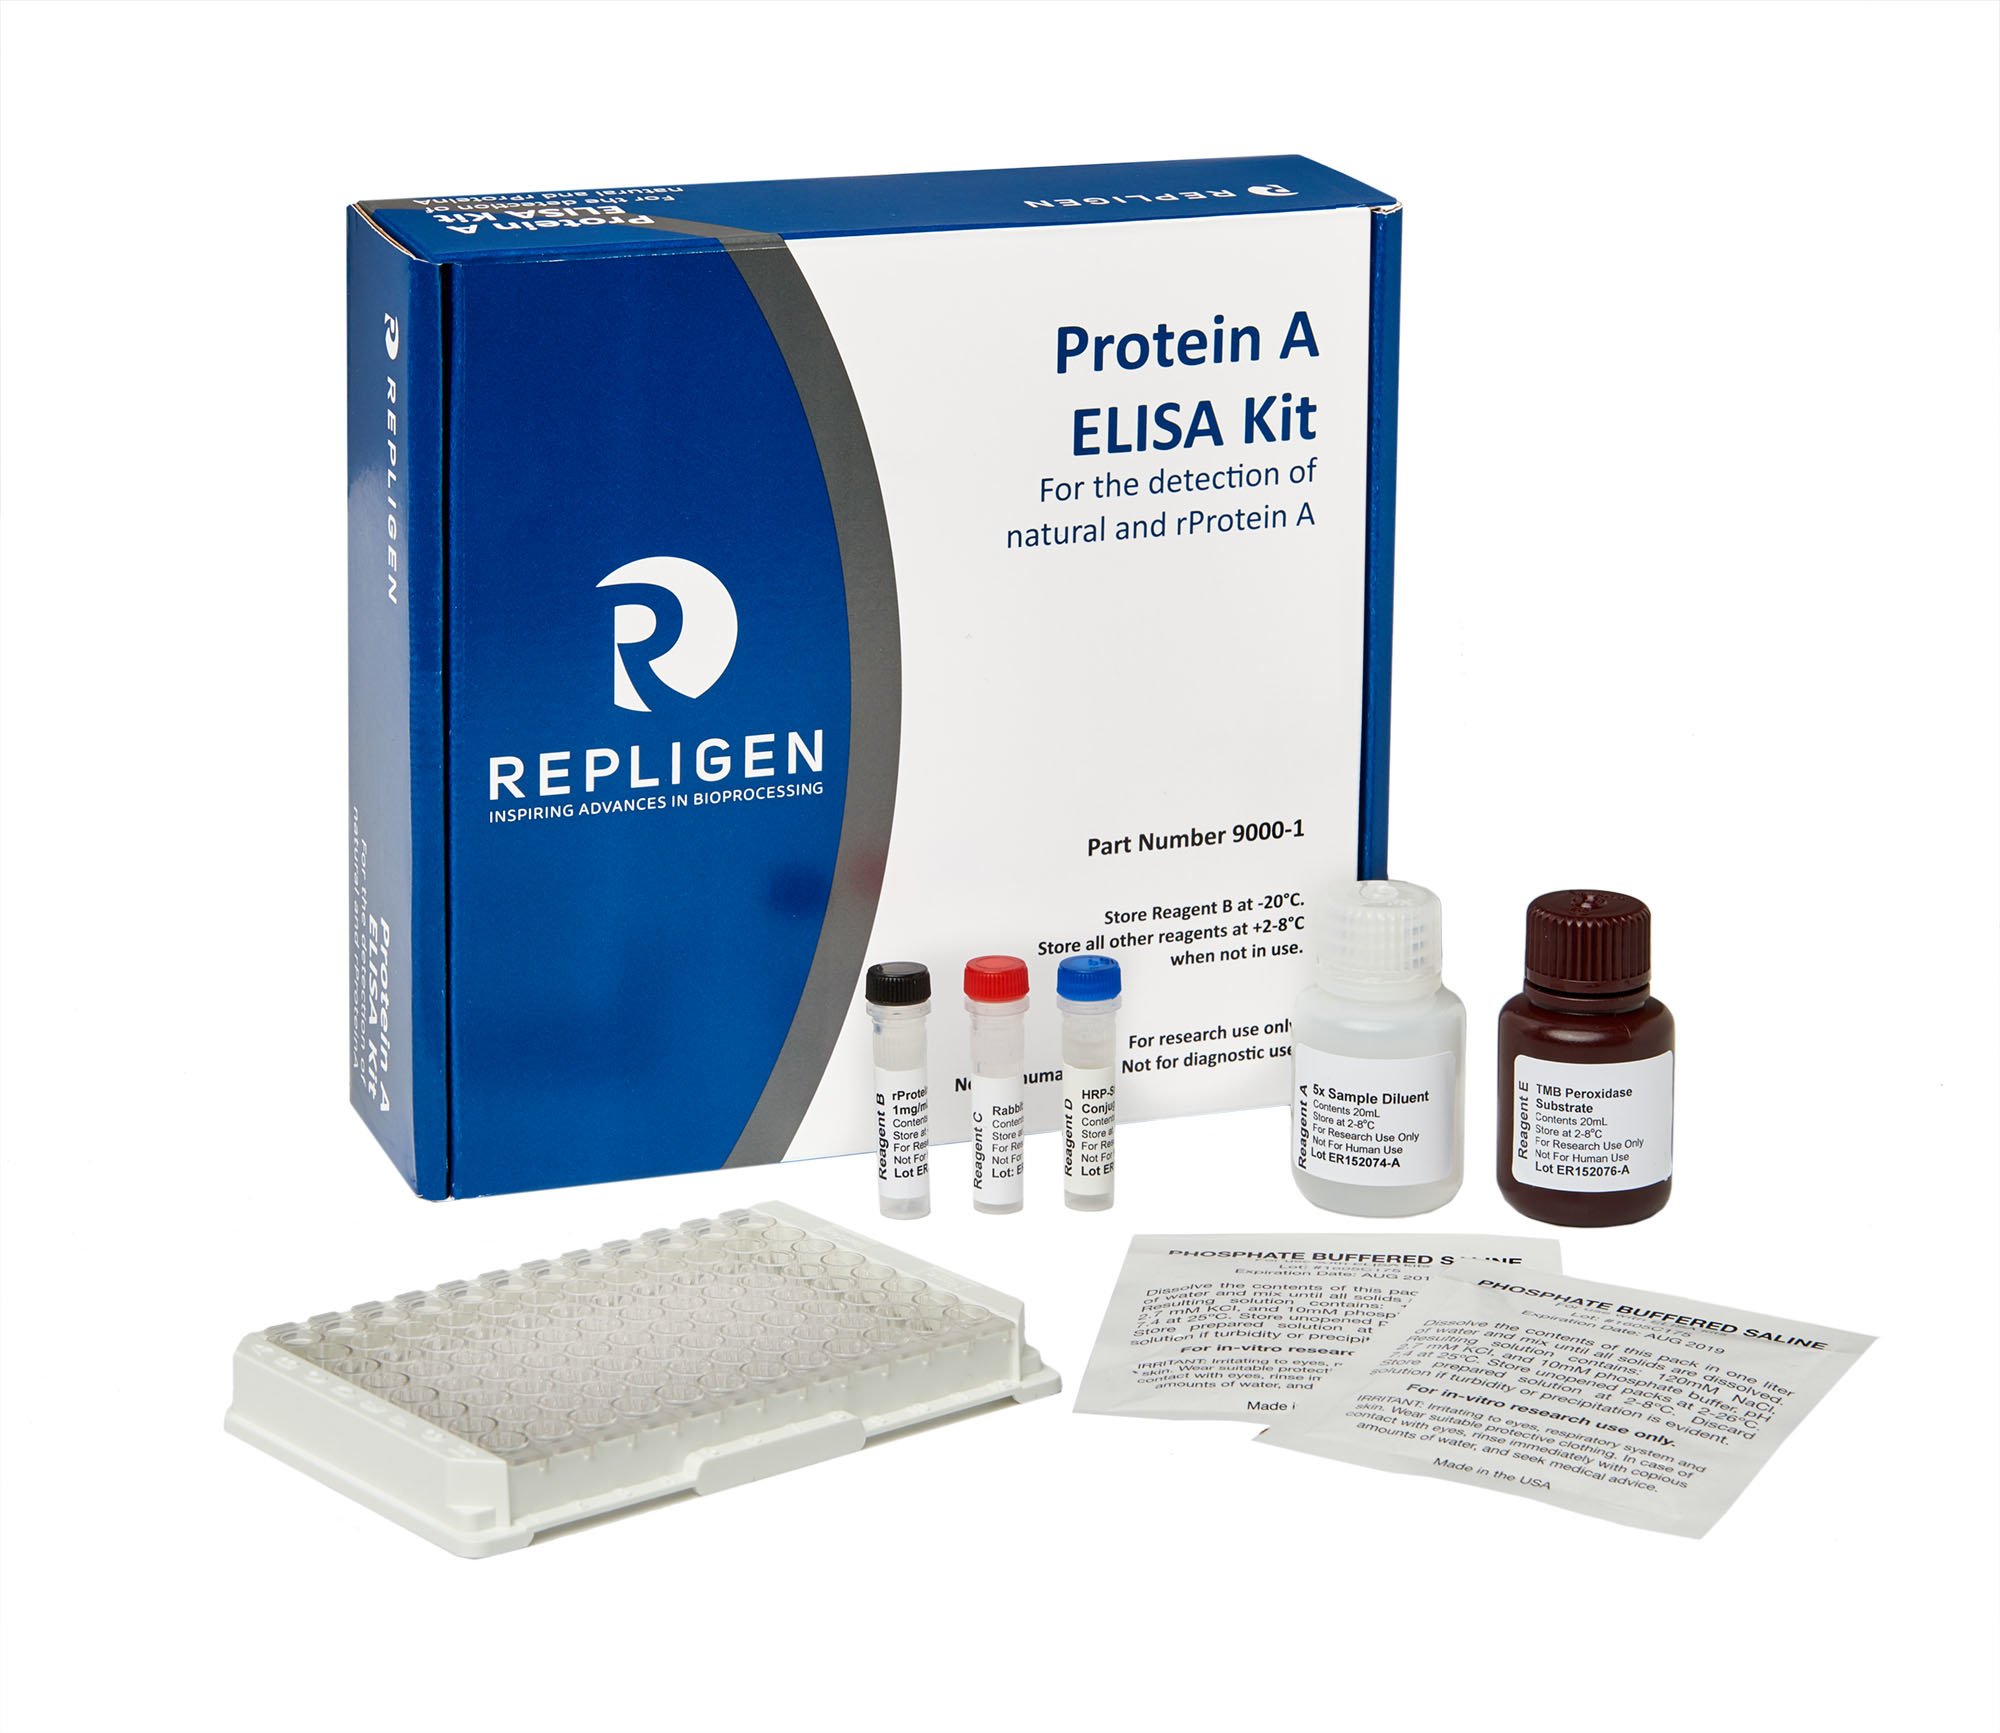 Protein A ELISA Kit for Native and Recombinant Protein A